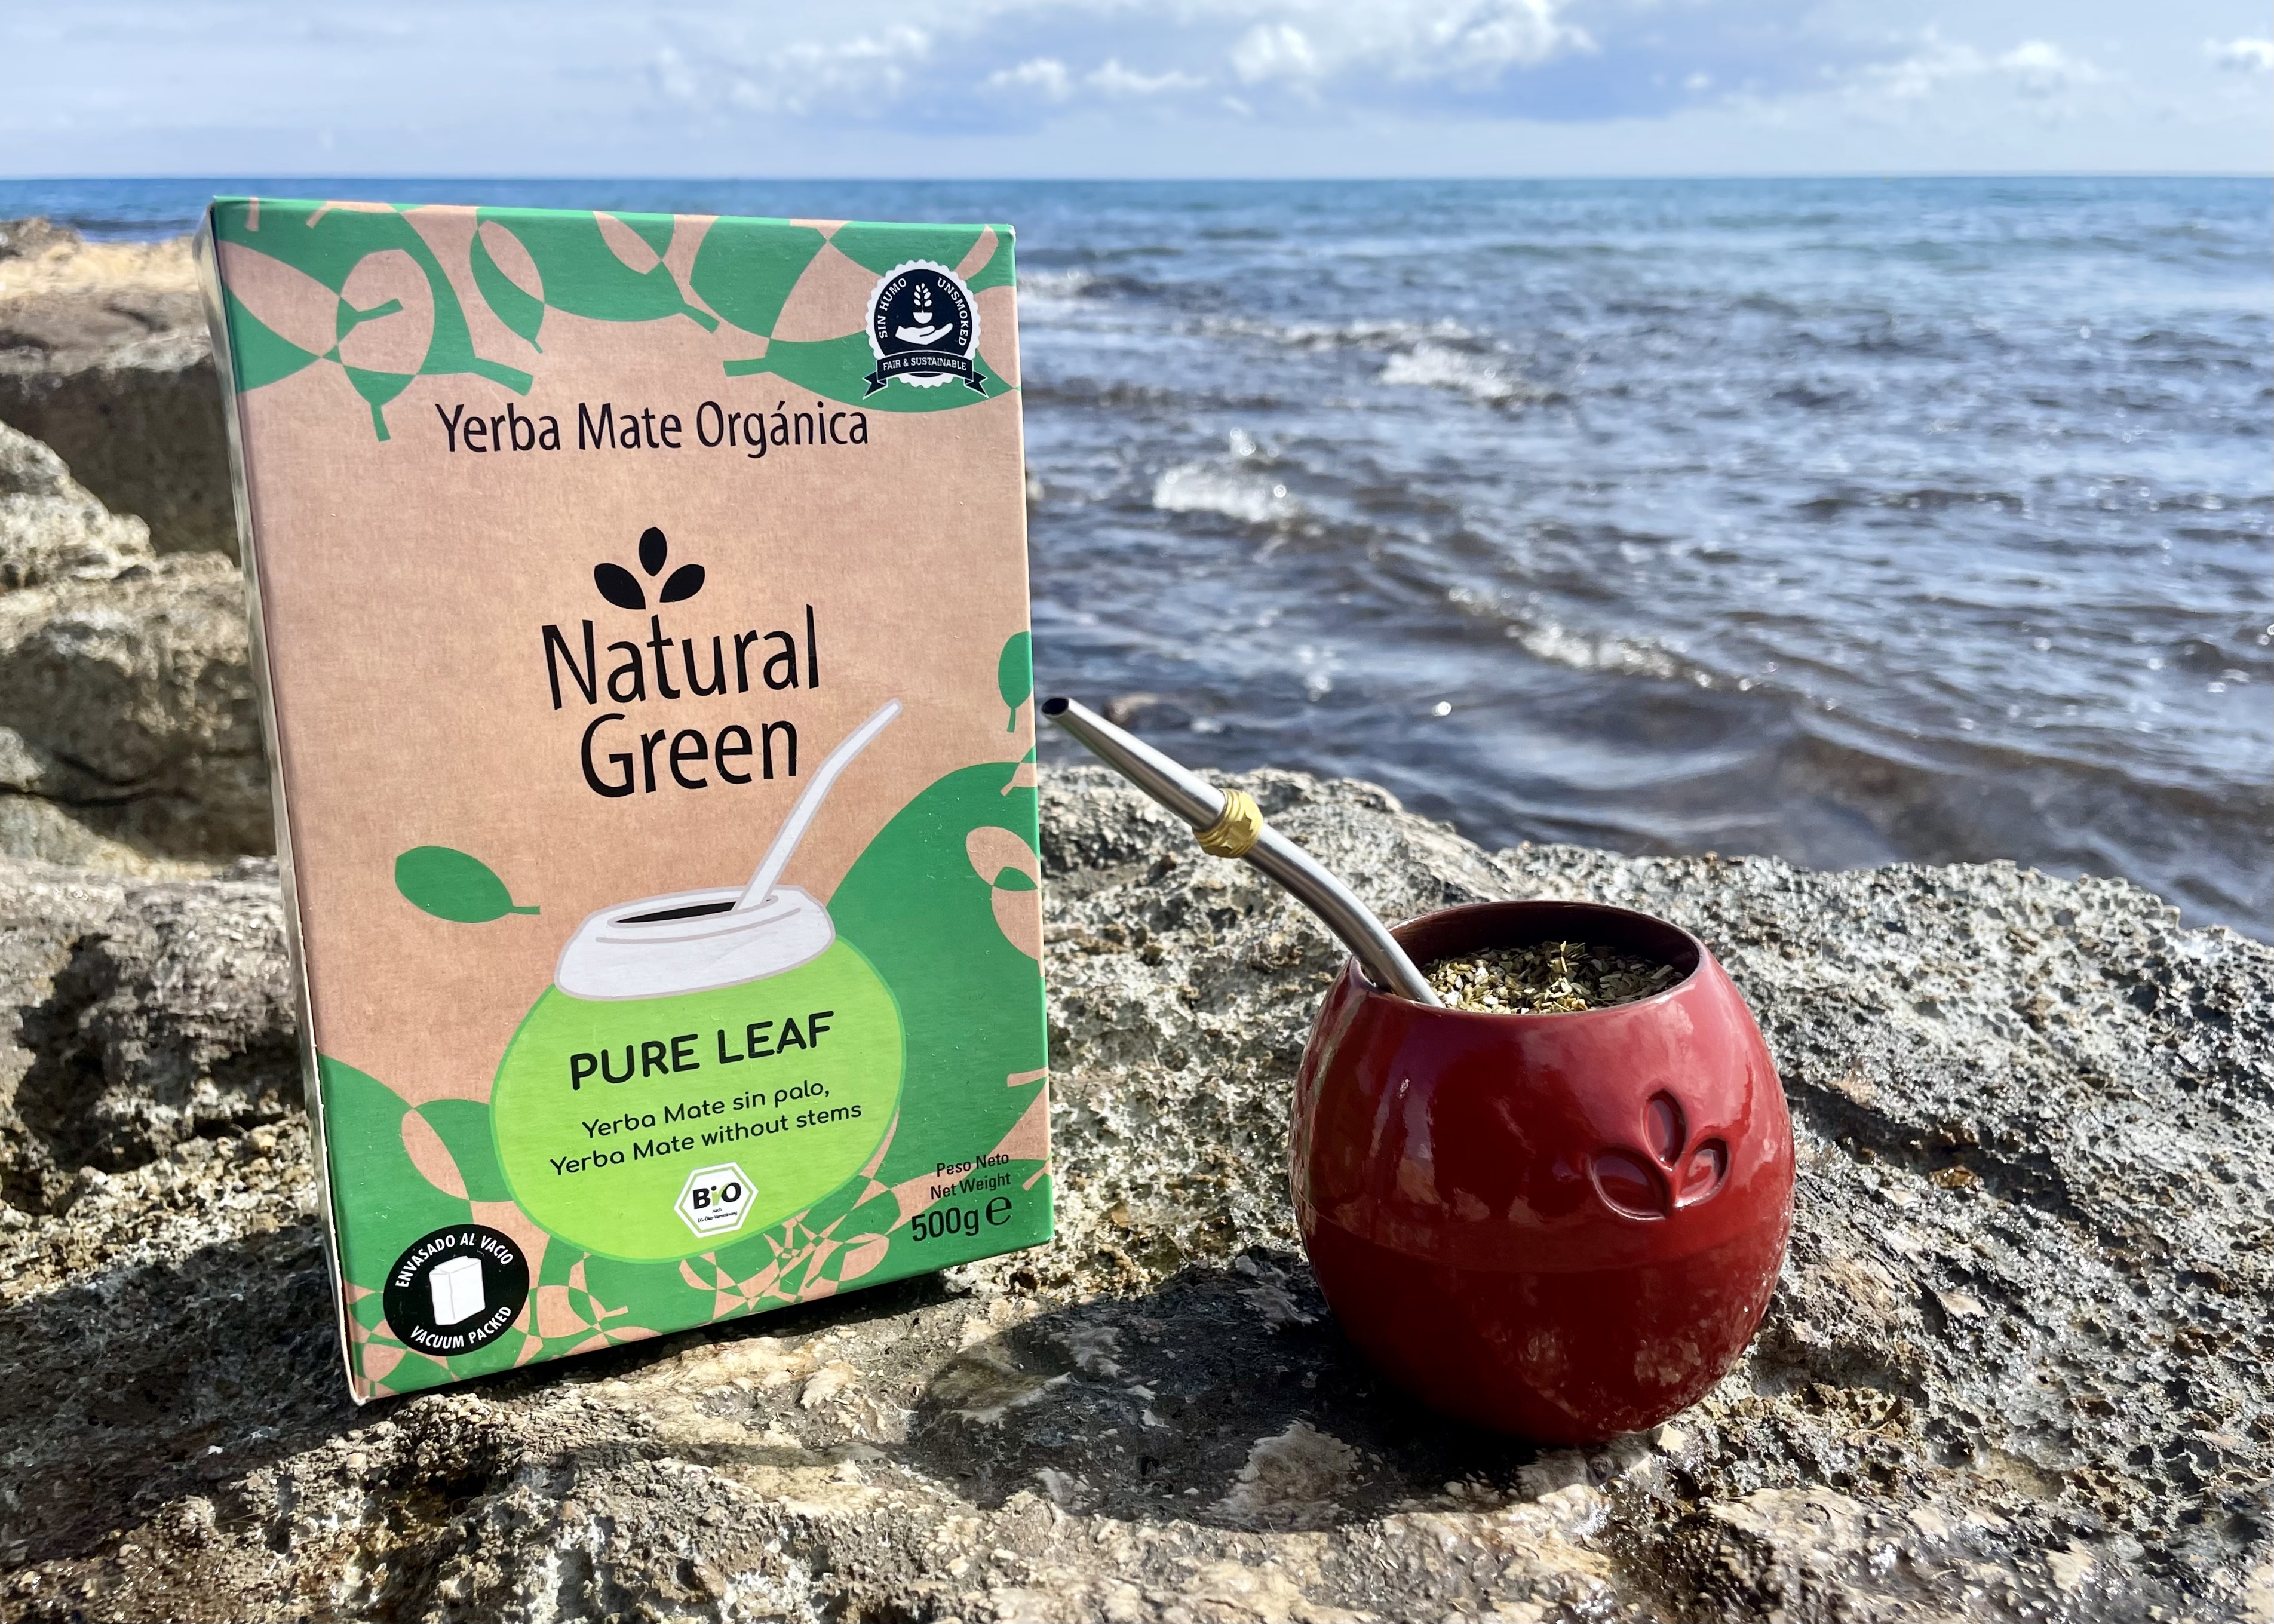 A packet of Natural Green Yerba Mate and a red Mate cup on a stone by the sea.